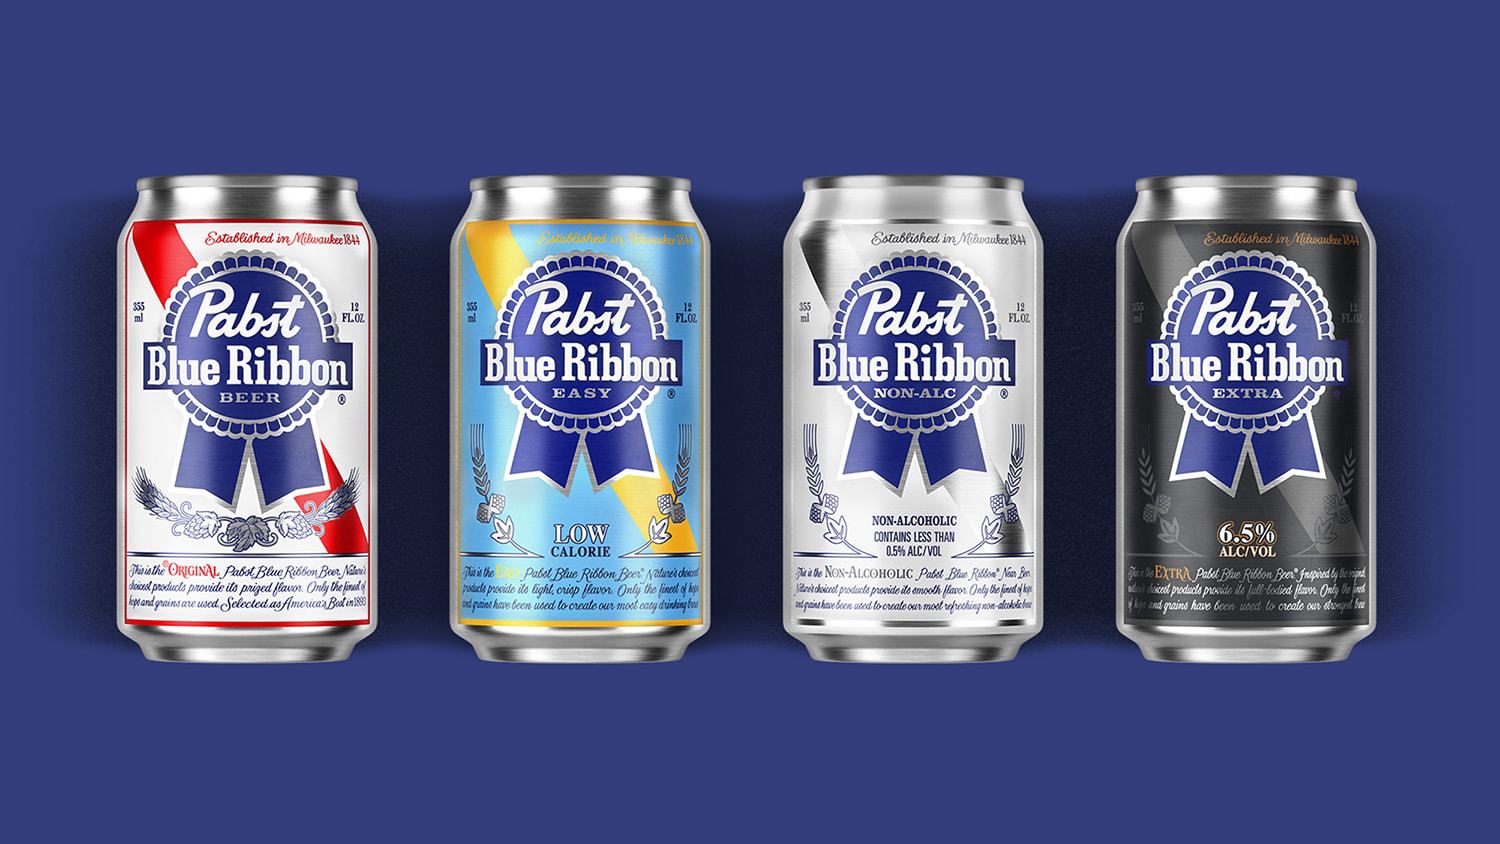 Untapping an American Icon: Design Bridge New York Partners With Pabst Blue Ribbon